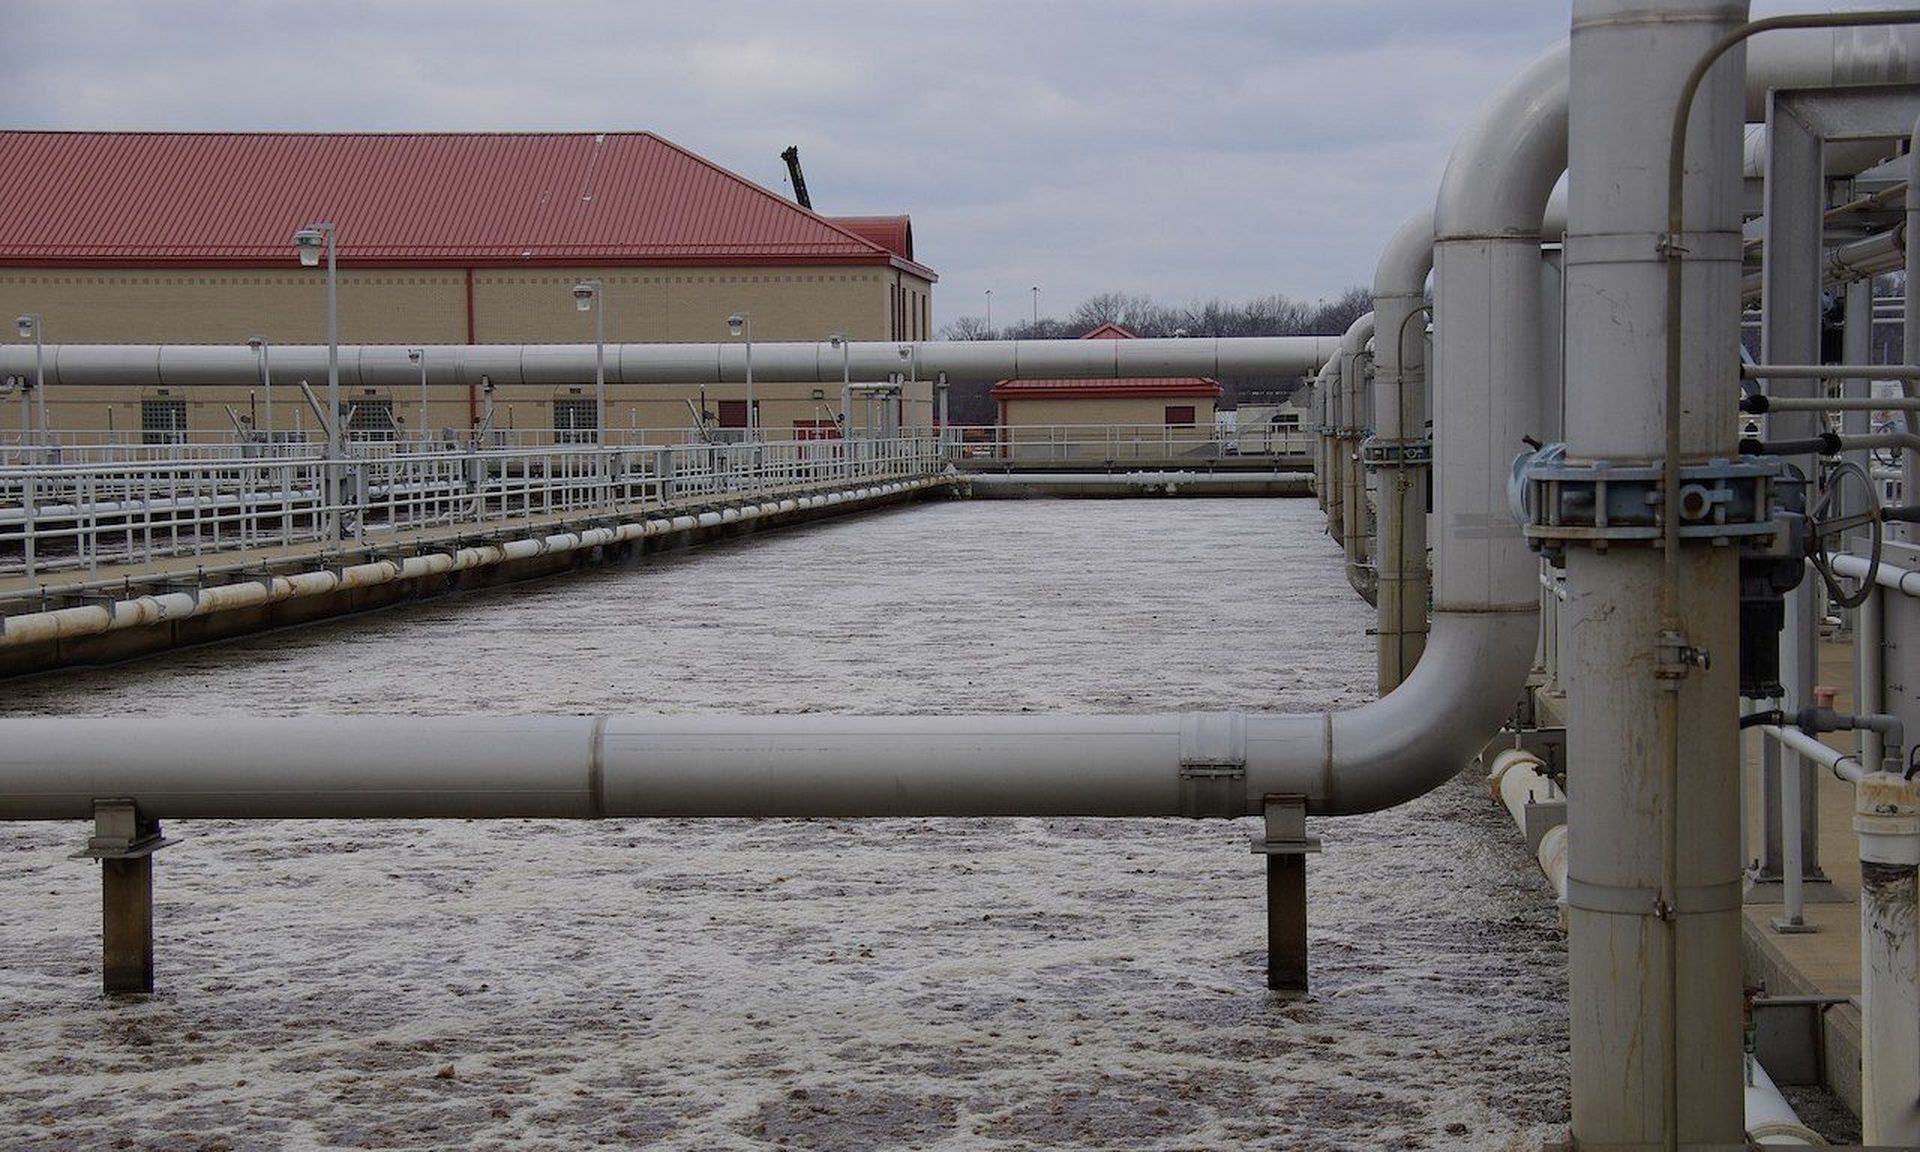 A wastewater treatment plant outside of Baltimore, Md. Today’s columnist, Andrea Carcano of Nozomi Networks, points out that the attempted attack at the water facility February 5 in Oldsmar, Fla., underscores the vulnerability of similar plants around the country. Carcano offers five takeaways security teams can put to work.